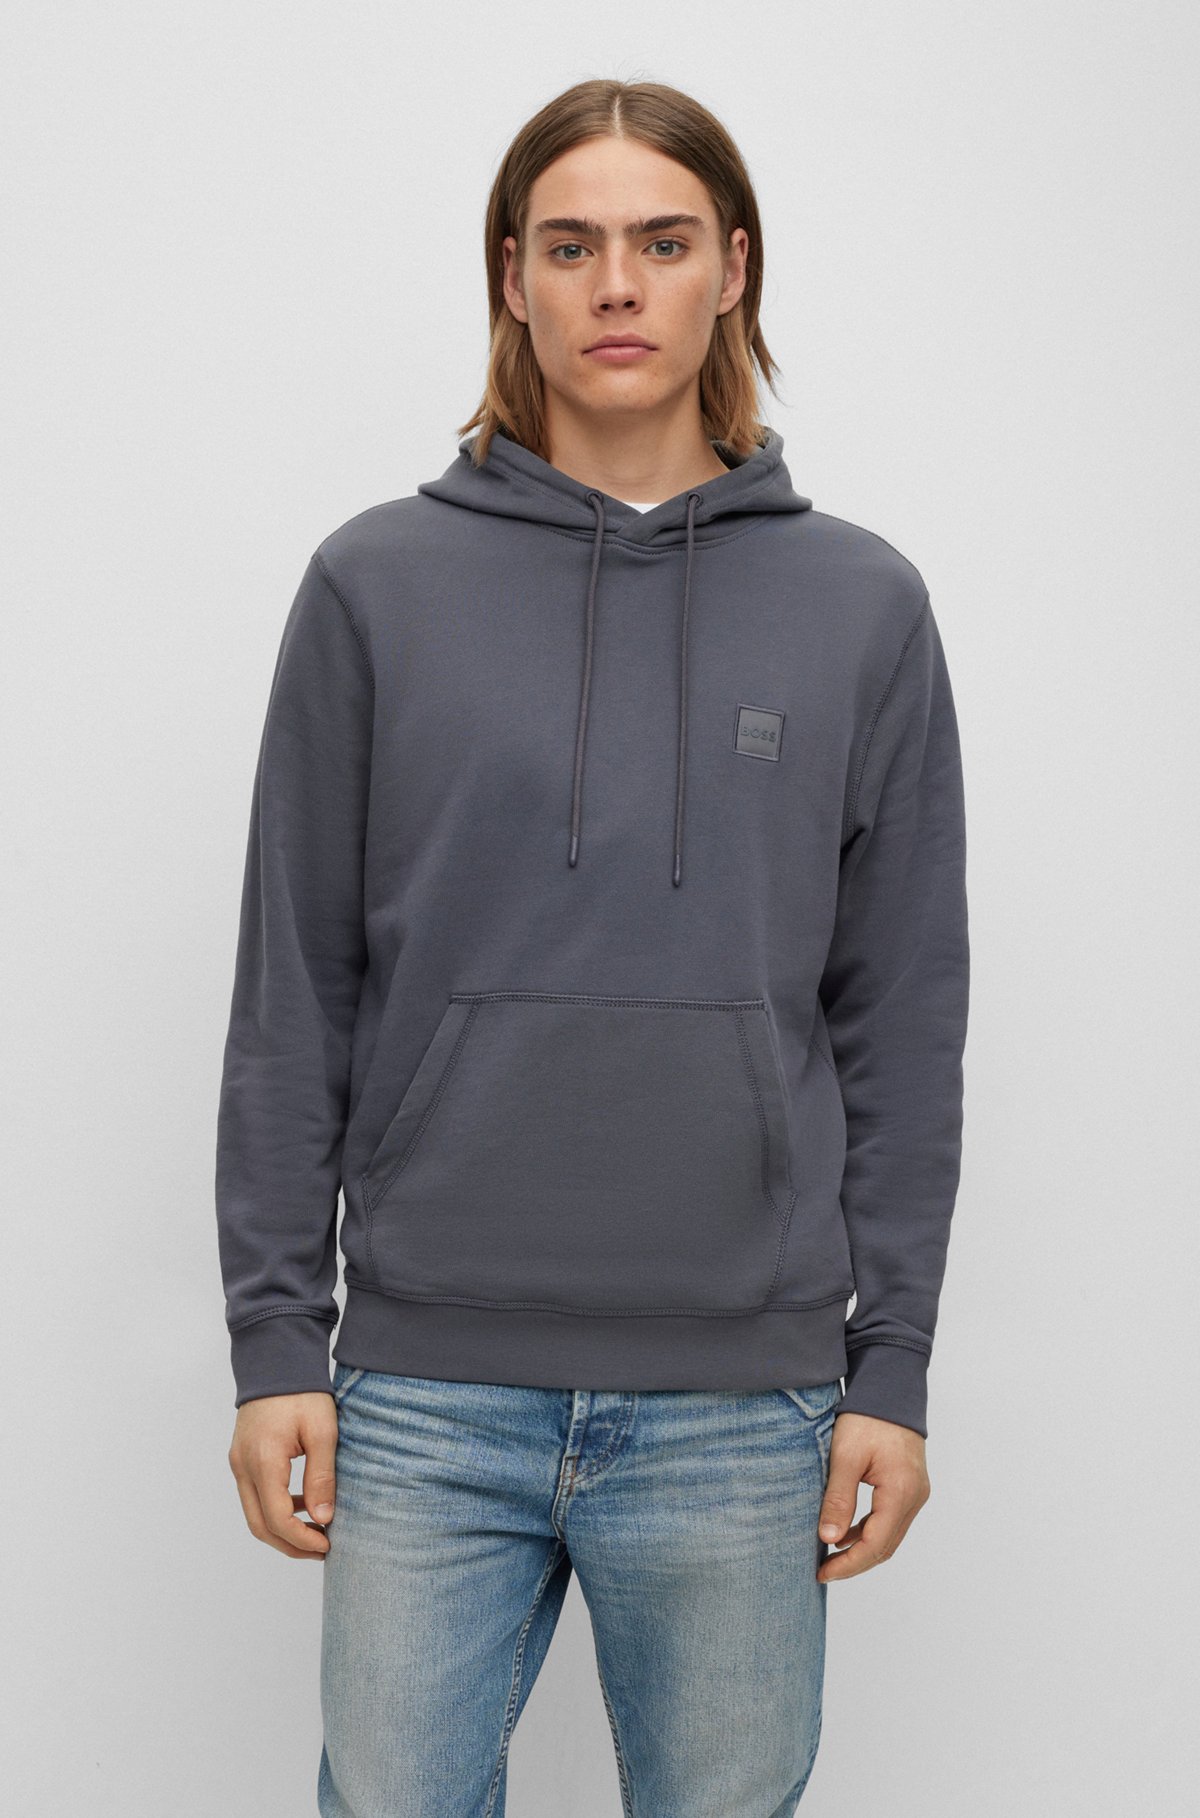 French-terry-cotton hooded sweatshirt with logo patch, Dark Grey